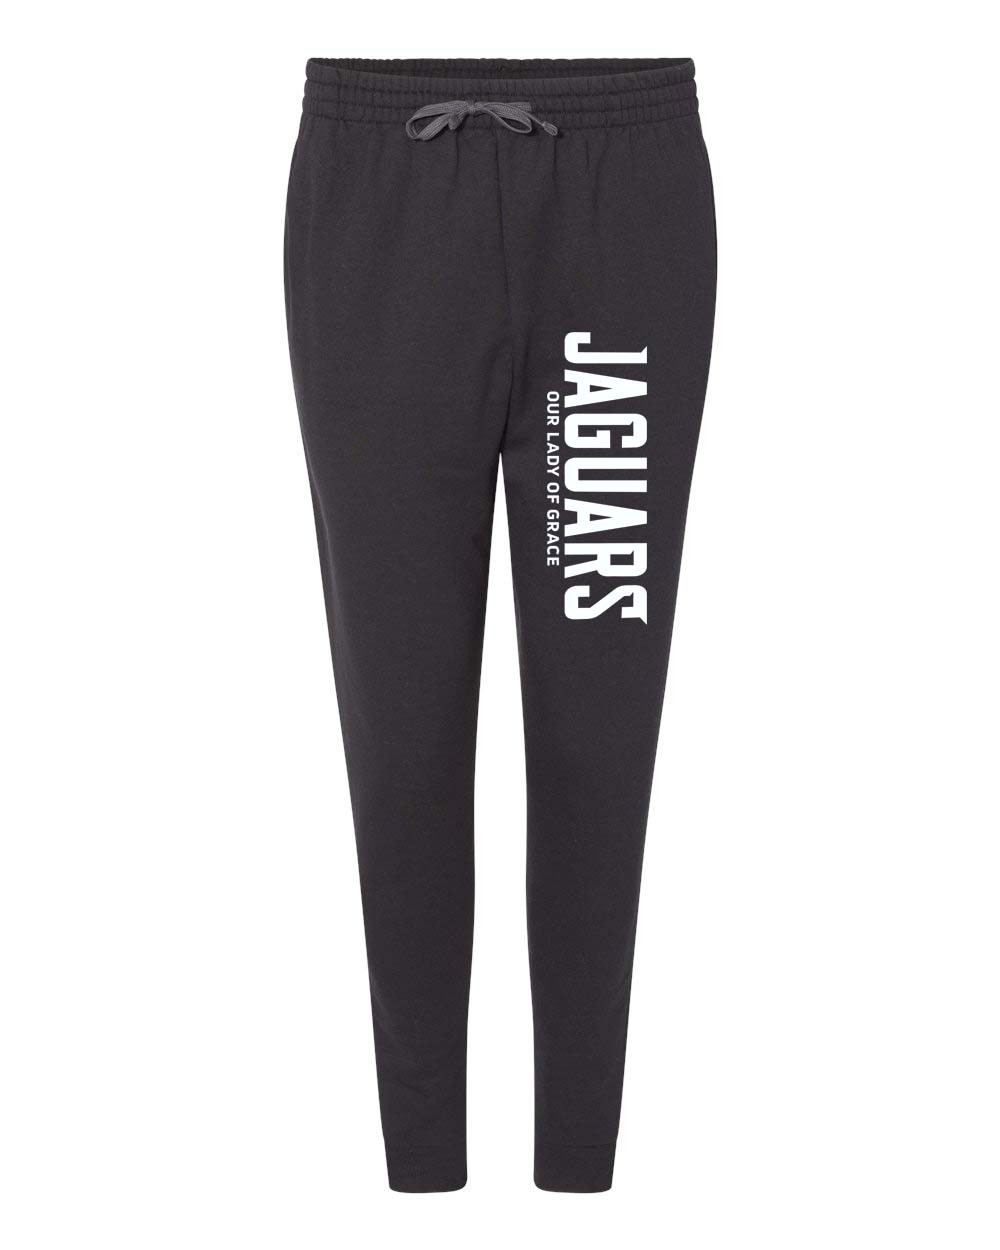 OLG Spirit Joggers w/ White Logo - Please Allow 2-3 Weeks for Delivery